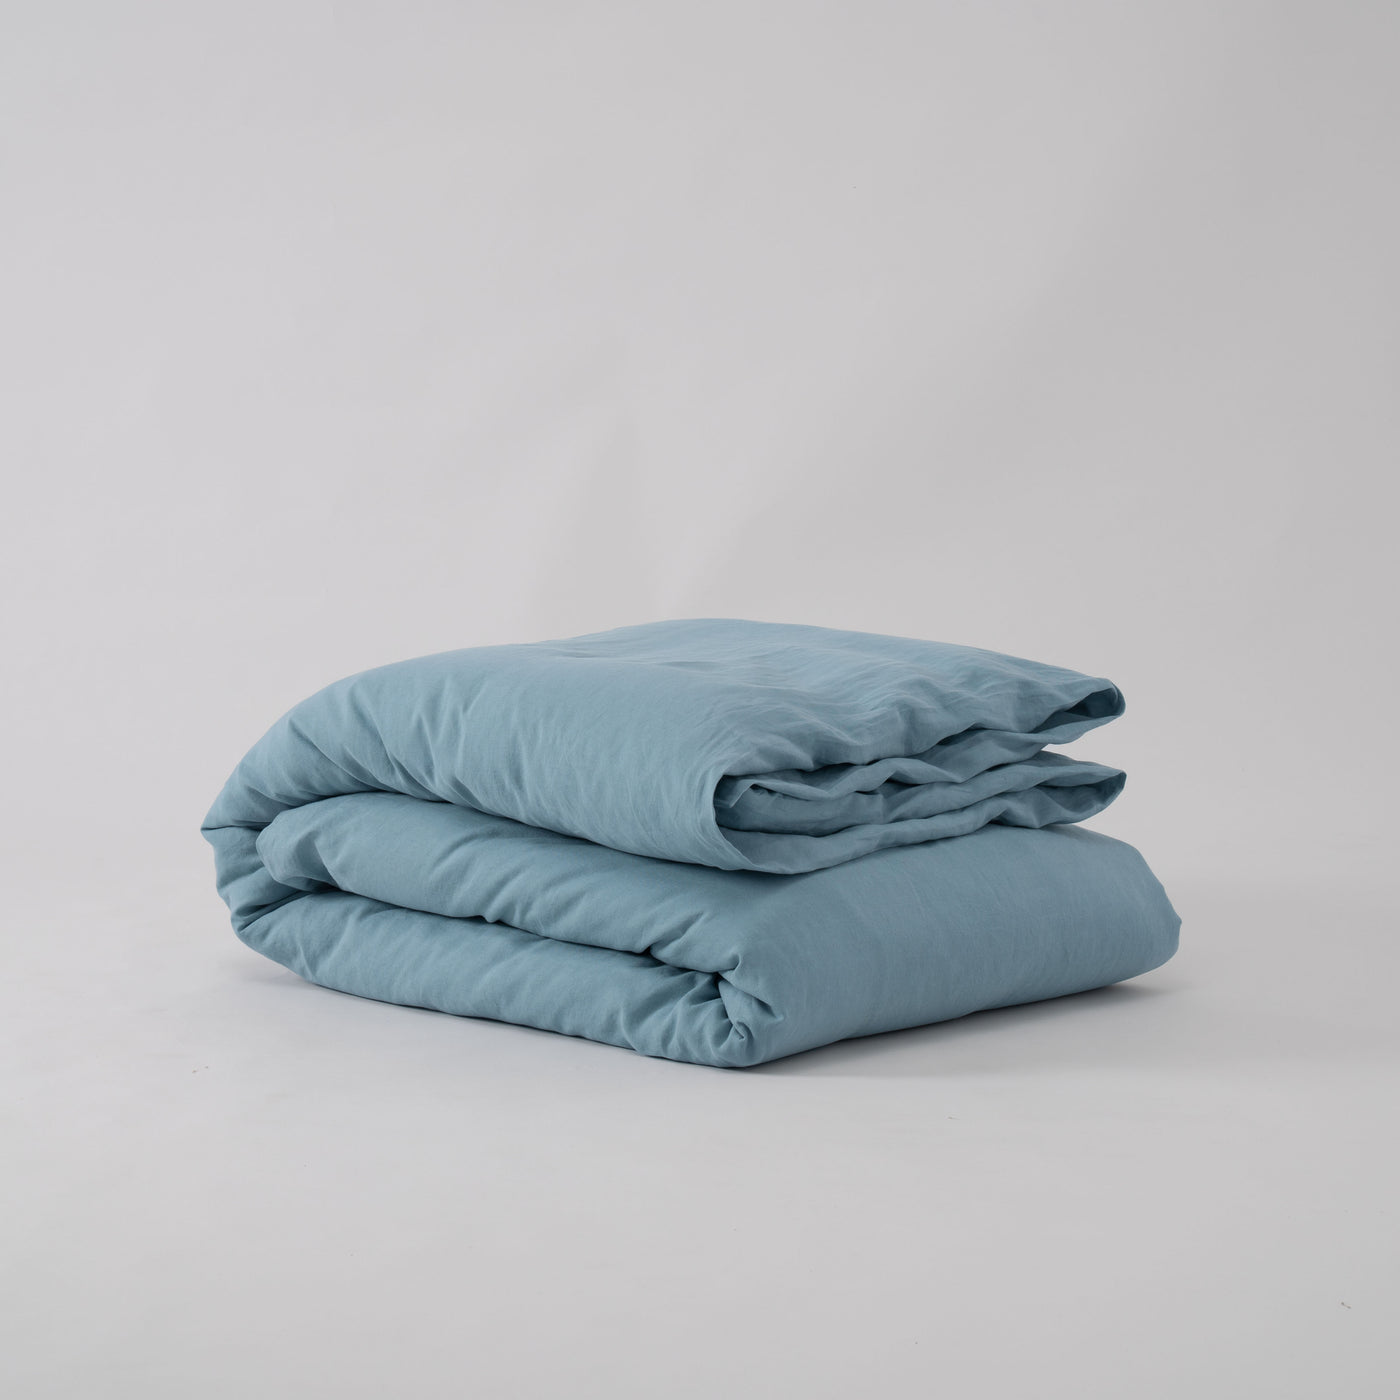 French Flax Linen Quilt Cover in Marine Blue